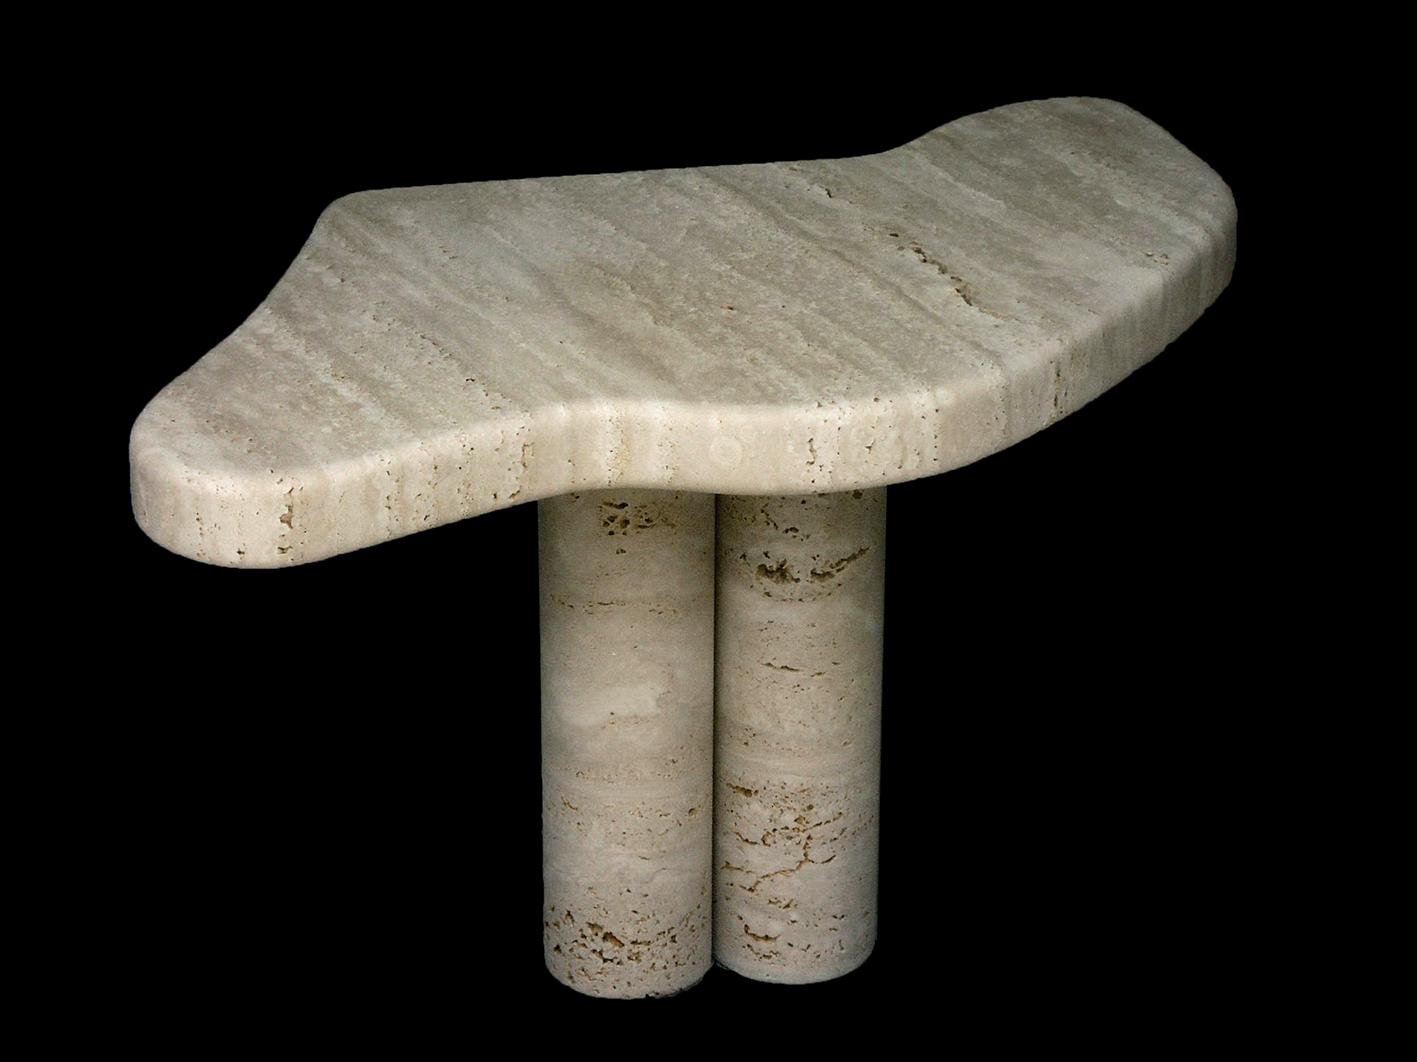 Kamasutra coffee table by Jean-Fréderic Bourdier
Dimensions: D 75 x W 44 x H 40 cm
Materials: Travertine.

Mostly guided by his sculptor skills JFB and his life time strong attraction for nature, has started out this collection in 2021 as he